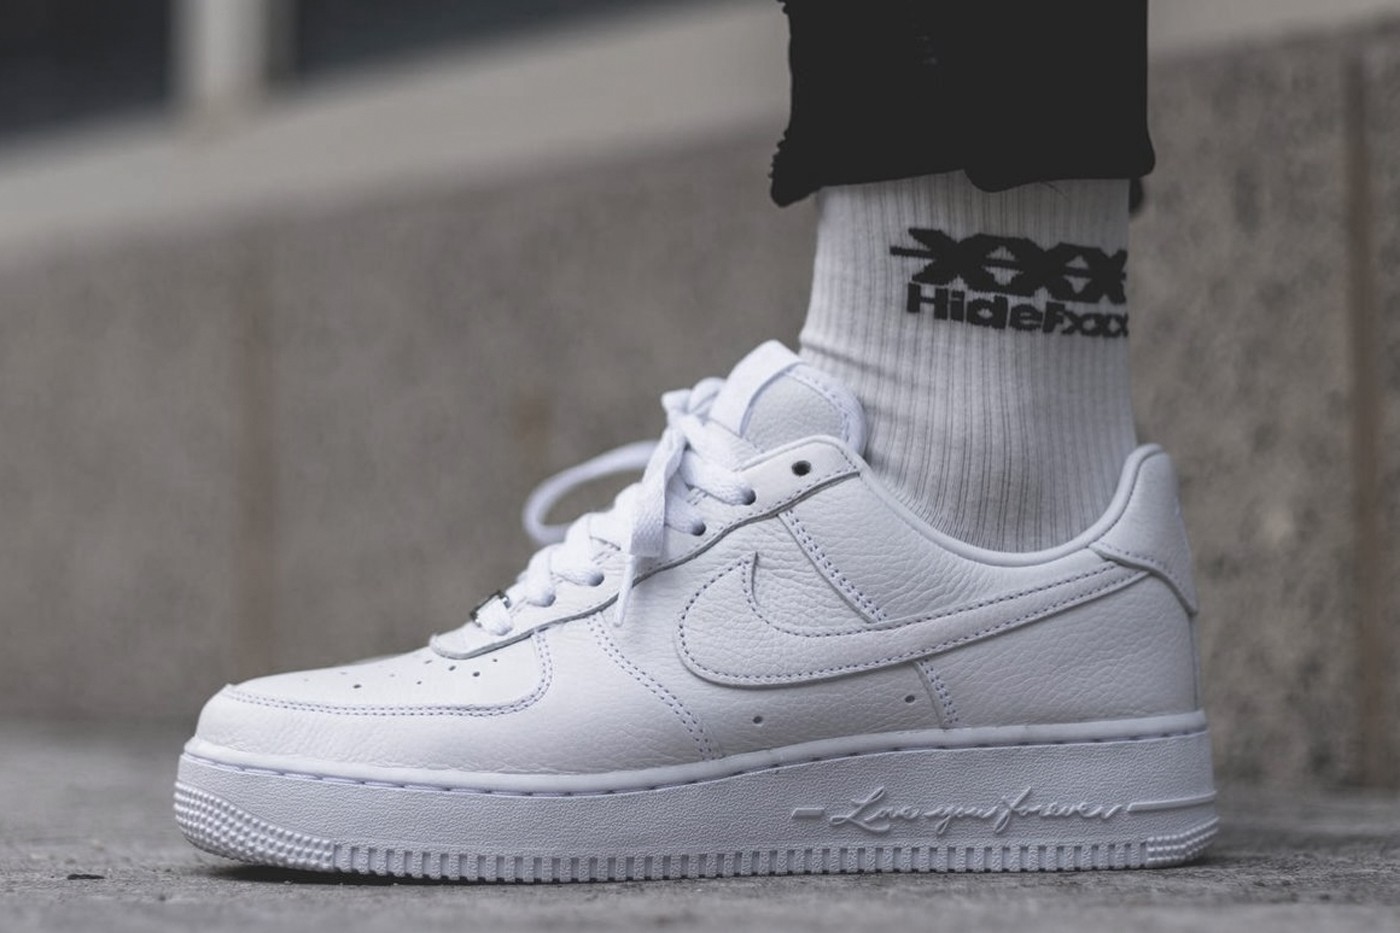 A Closer Look at the NOCTA x Nike Air Force 1 